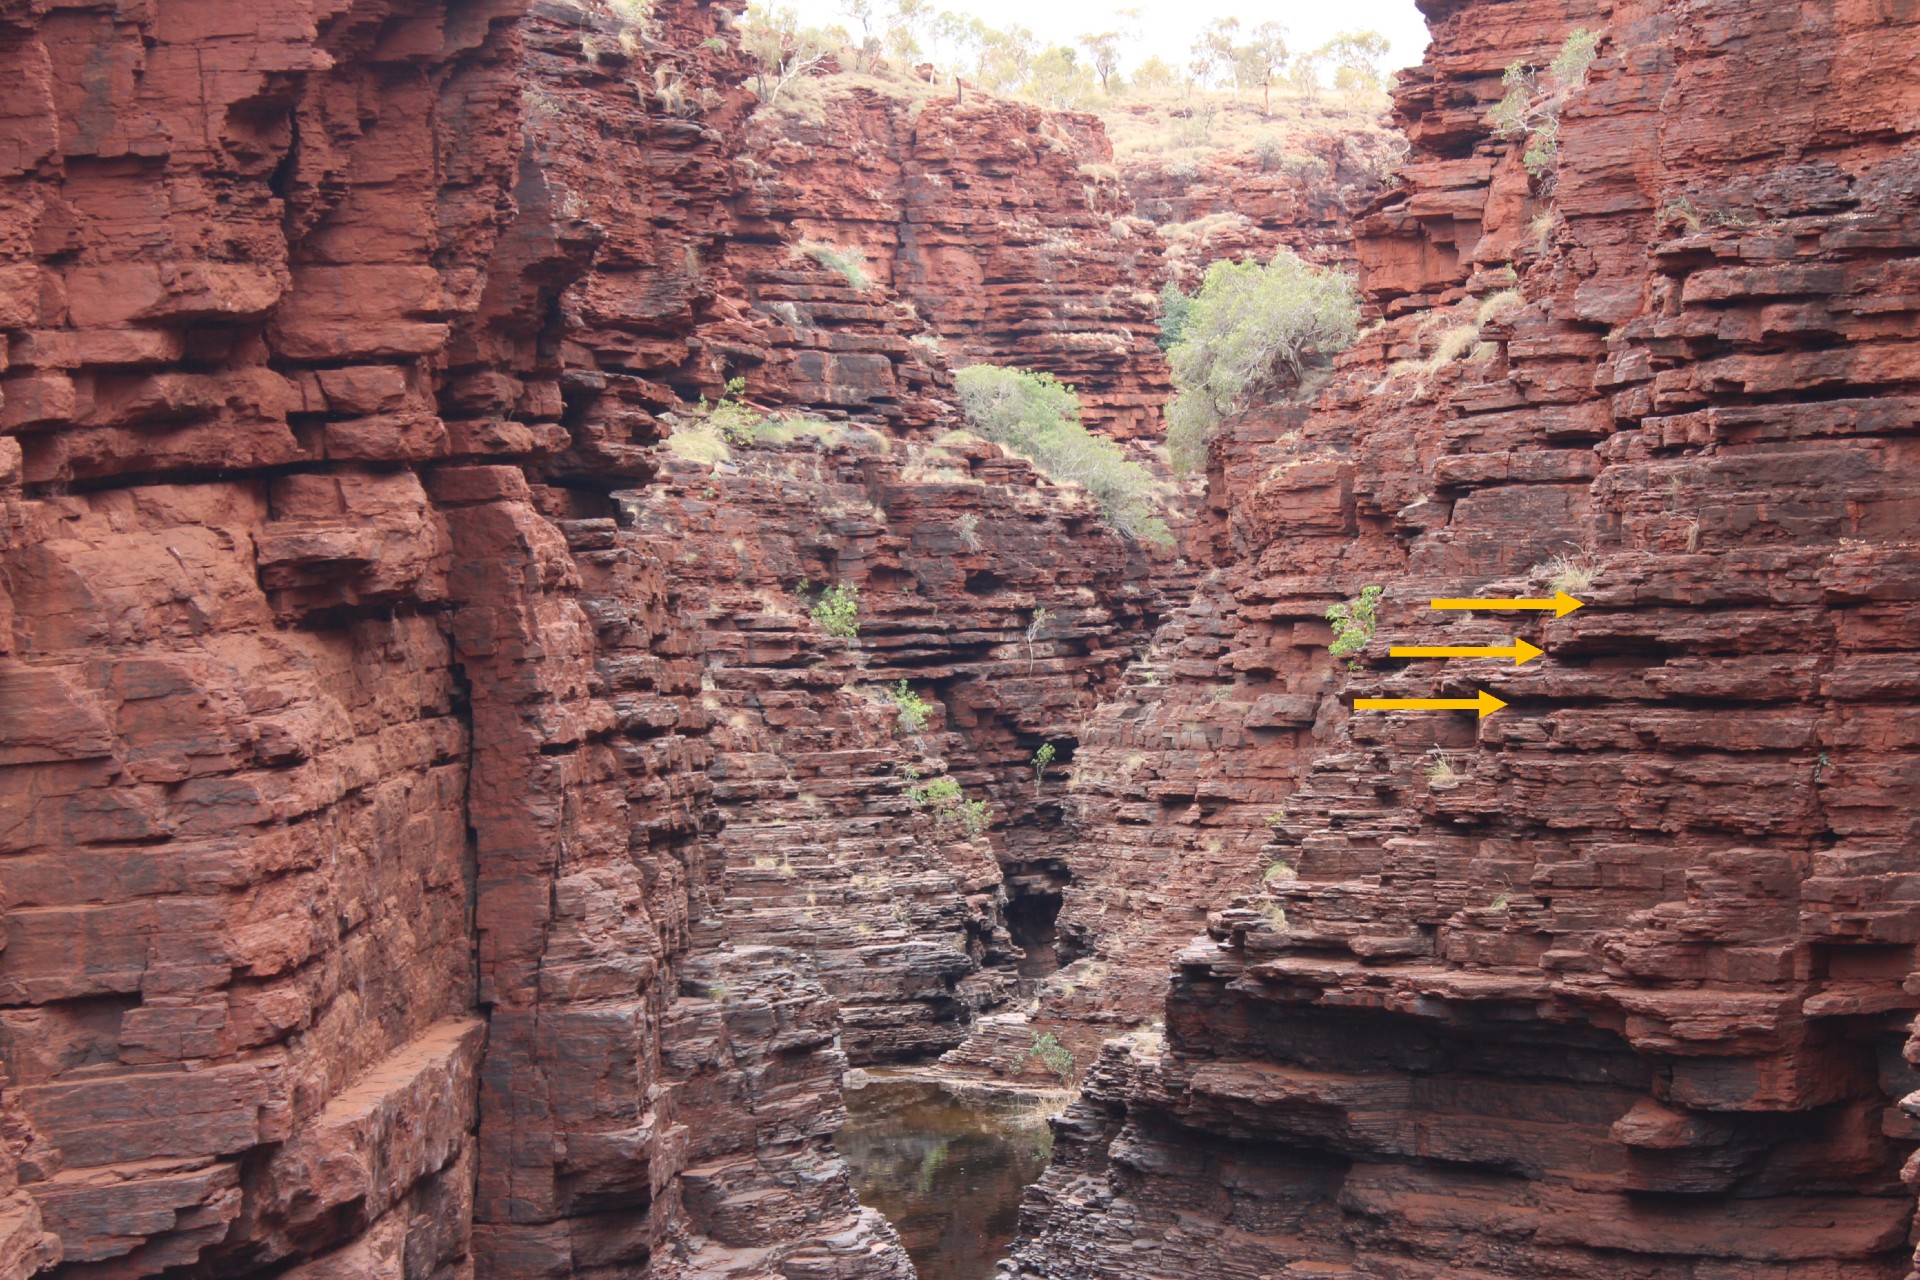 Jofra Gorge in Karijini National Park, Western Australia, showing regular alternations between reddish-brown harder rocks and softer, clay-rich rocks (indicated by arrows) at an average thickness of 85 cm. These changes are explained by past climate changes caused by changes in the eccentricity of Earth's orbit.